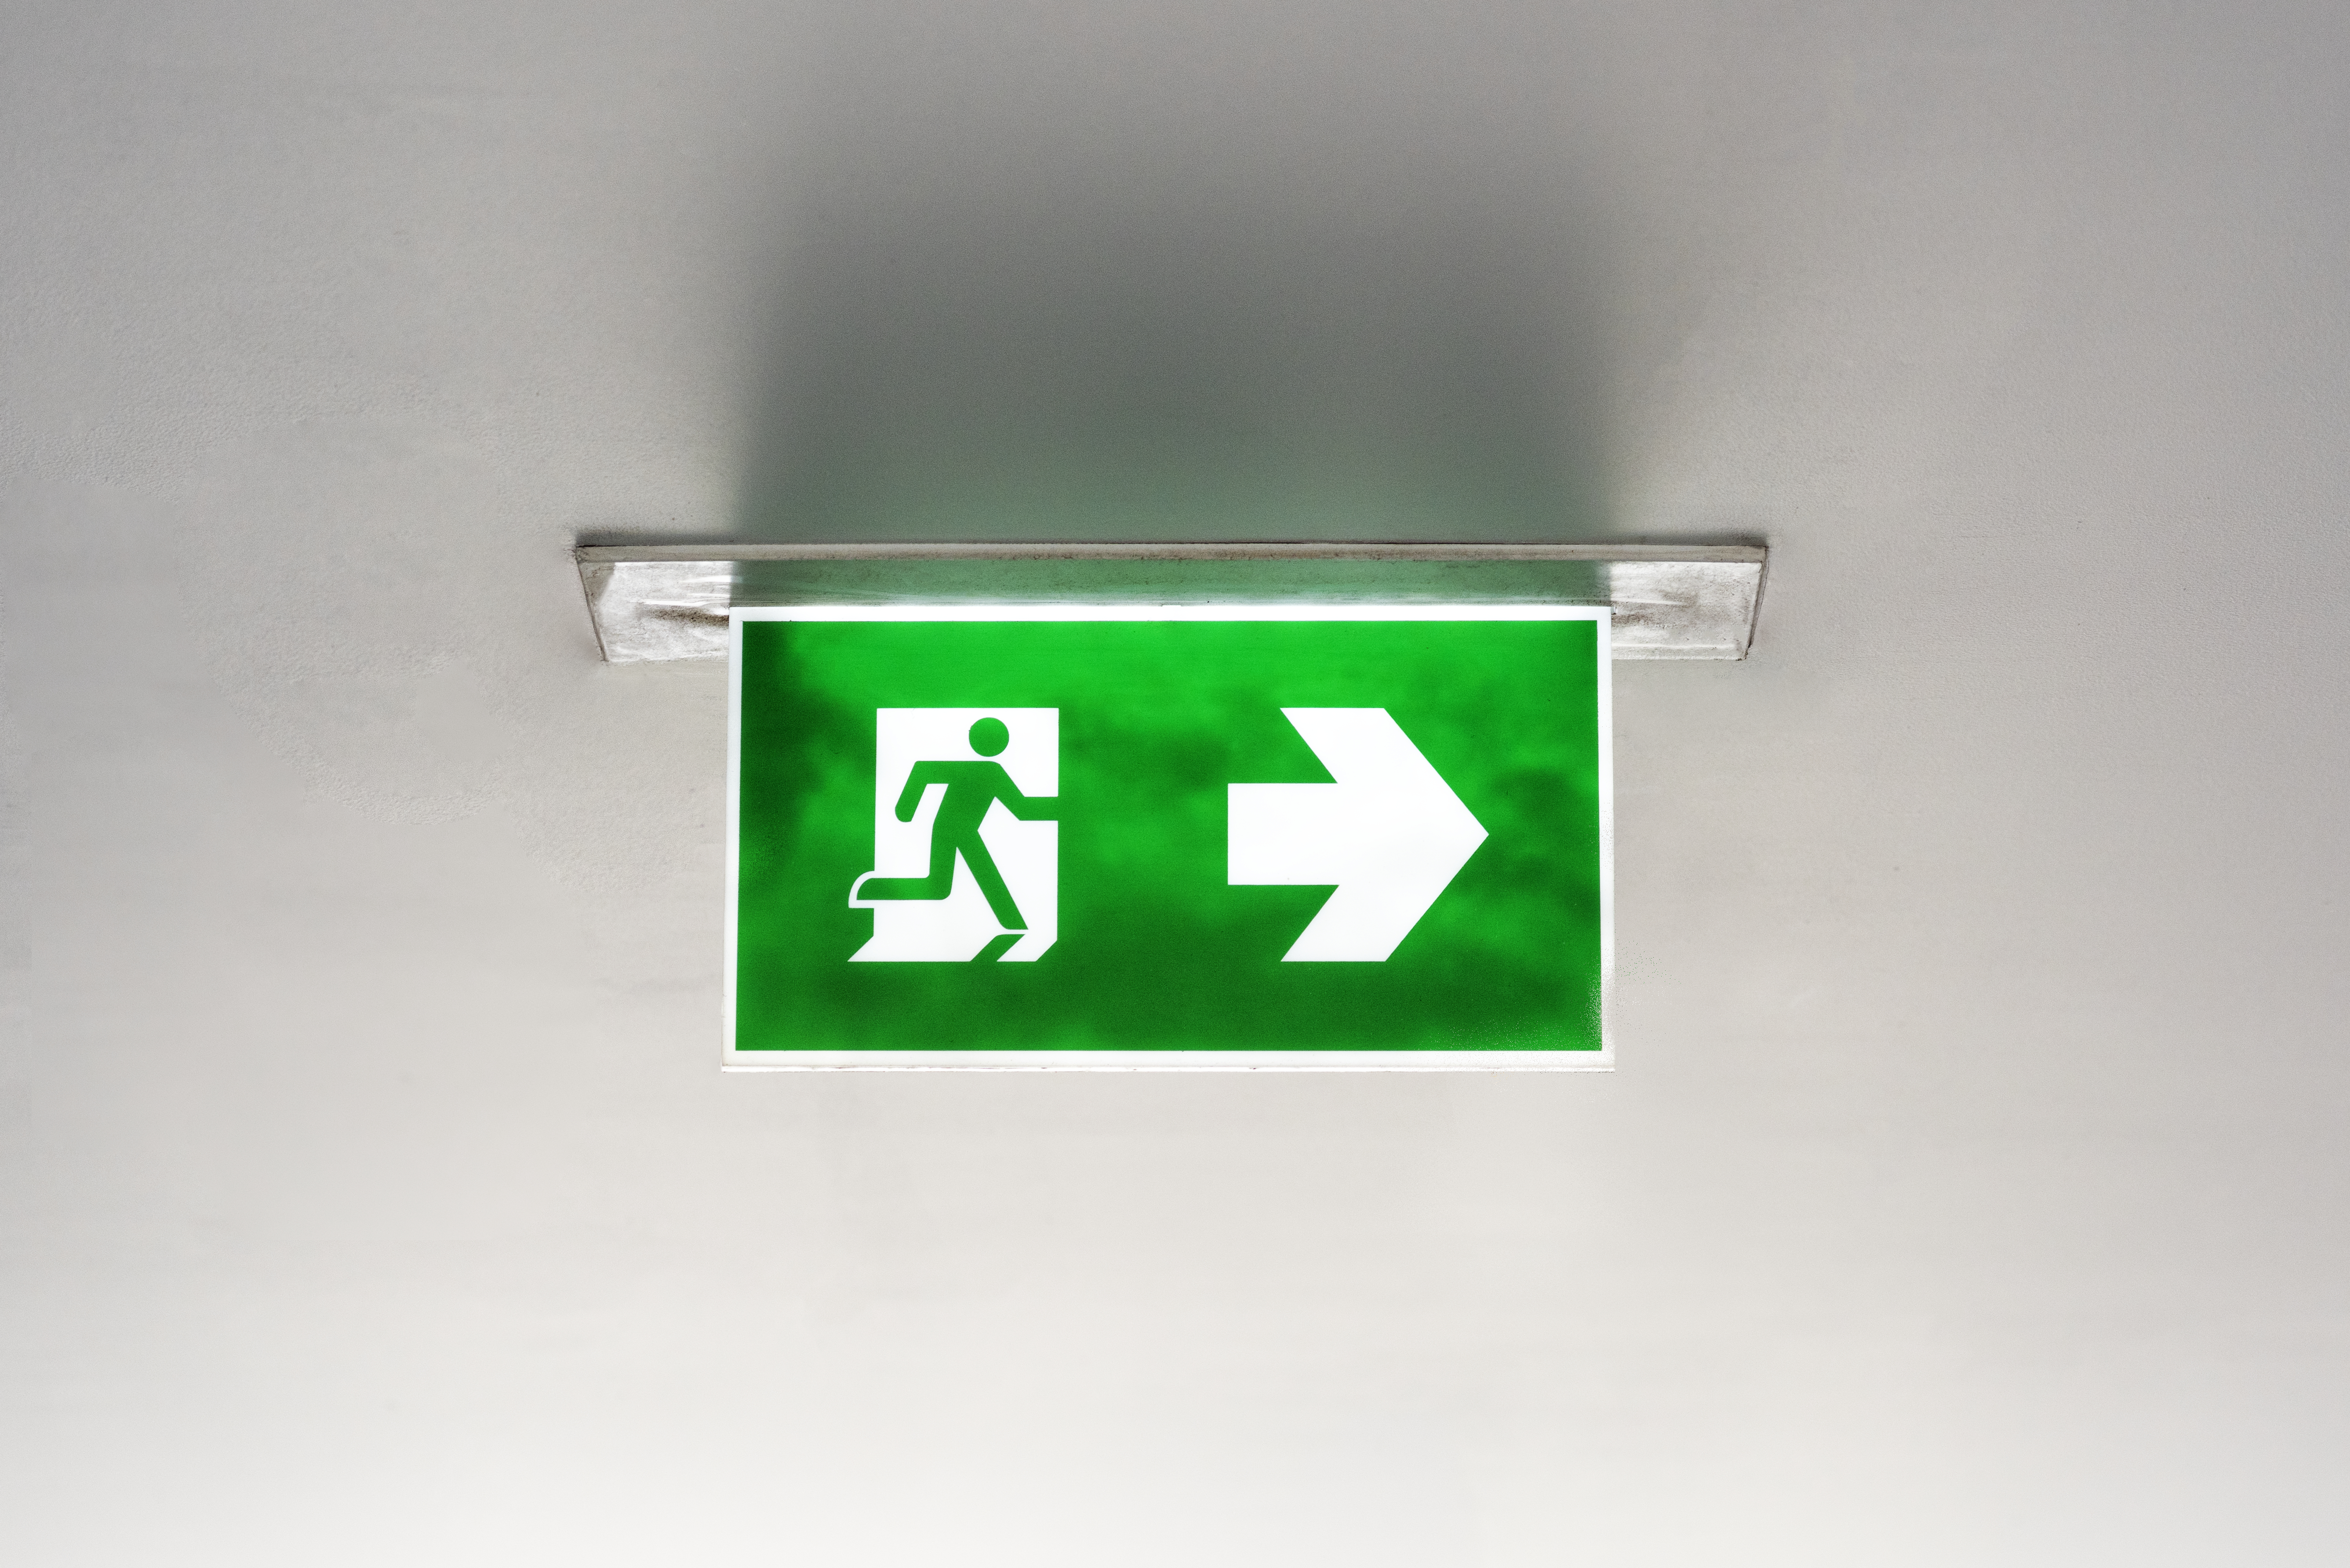 Green emergency exit sign on the ceiling